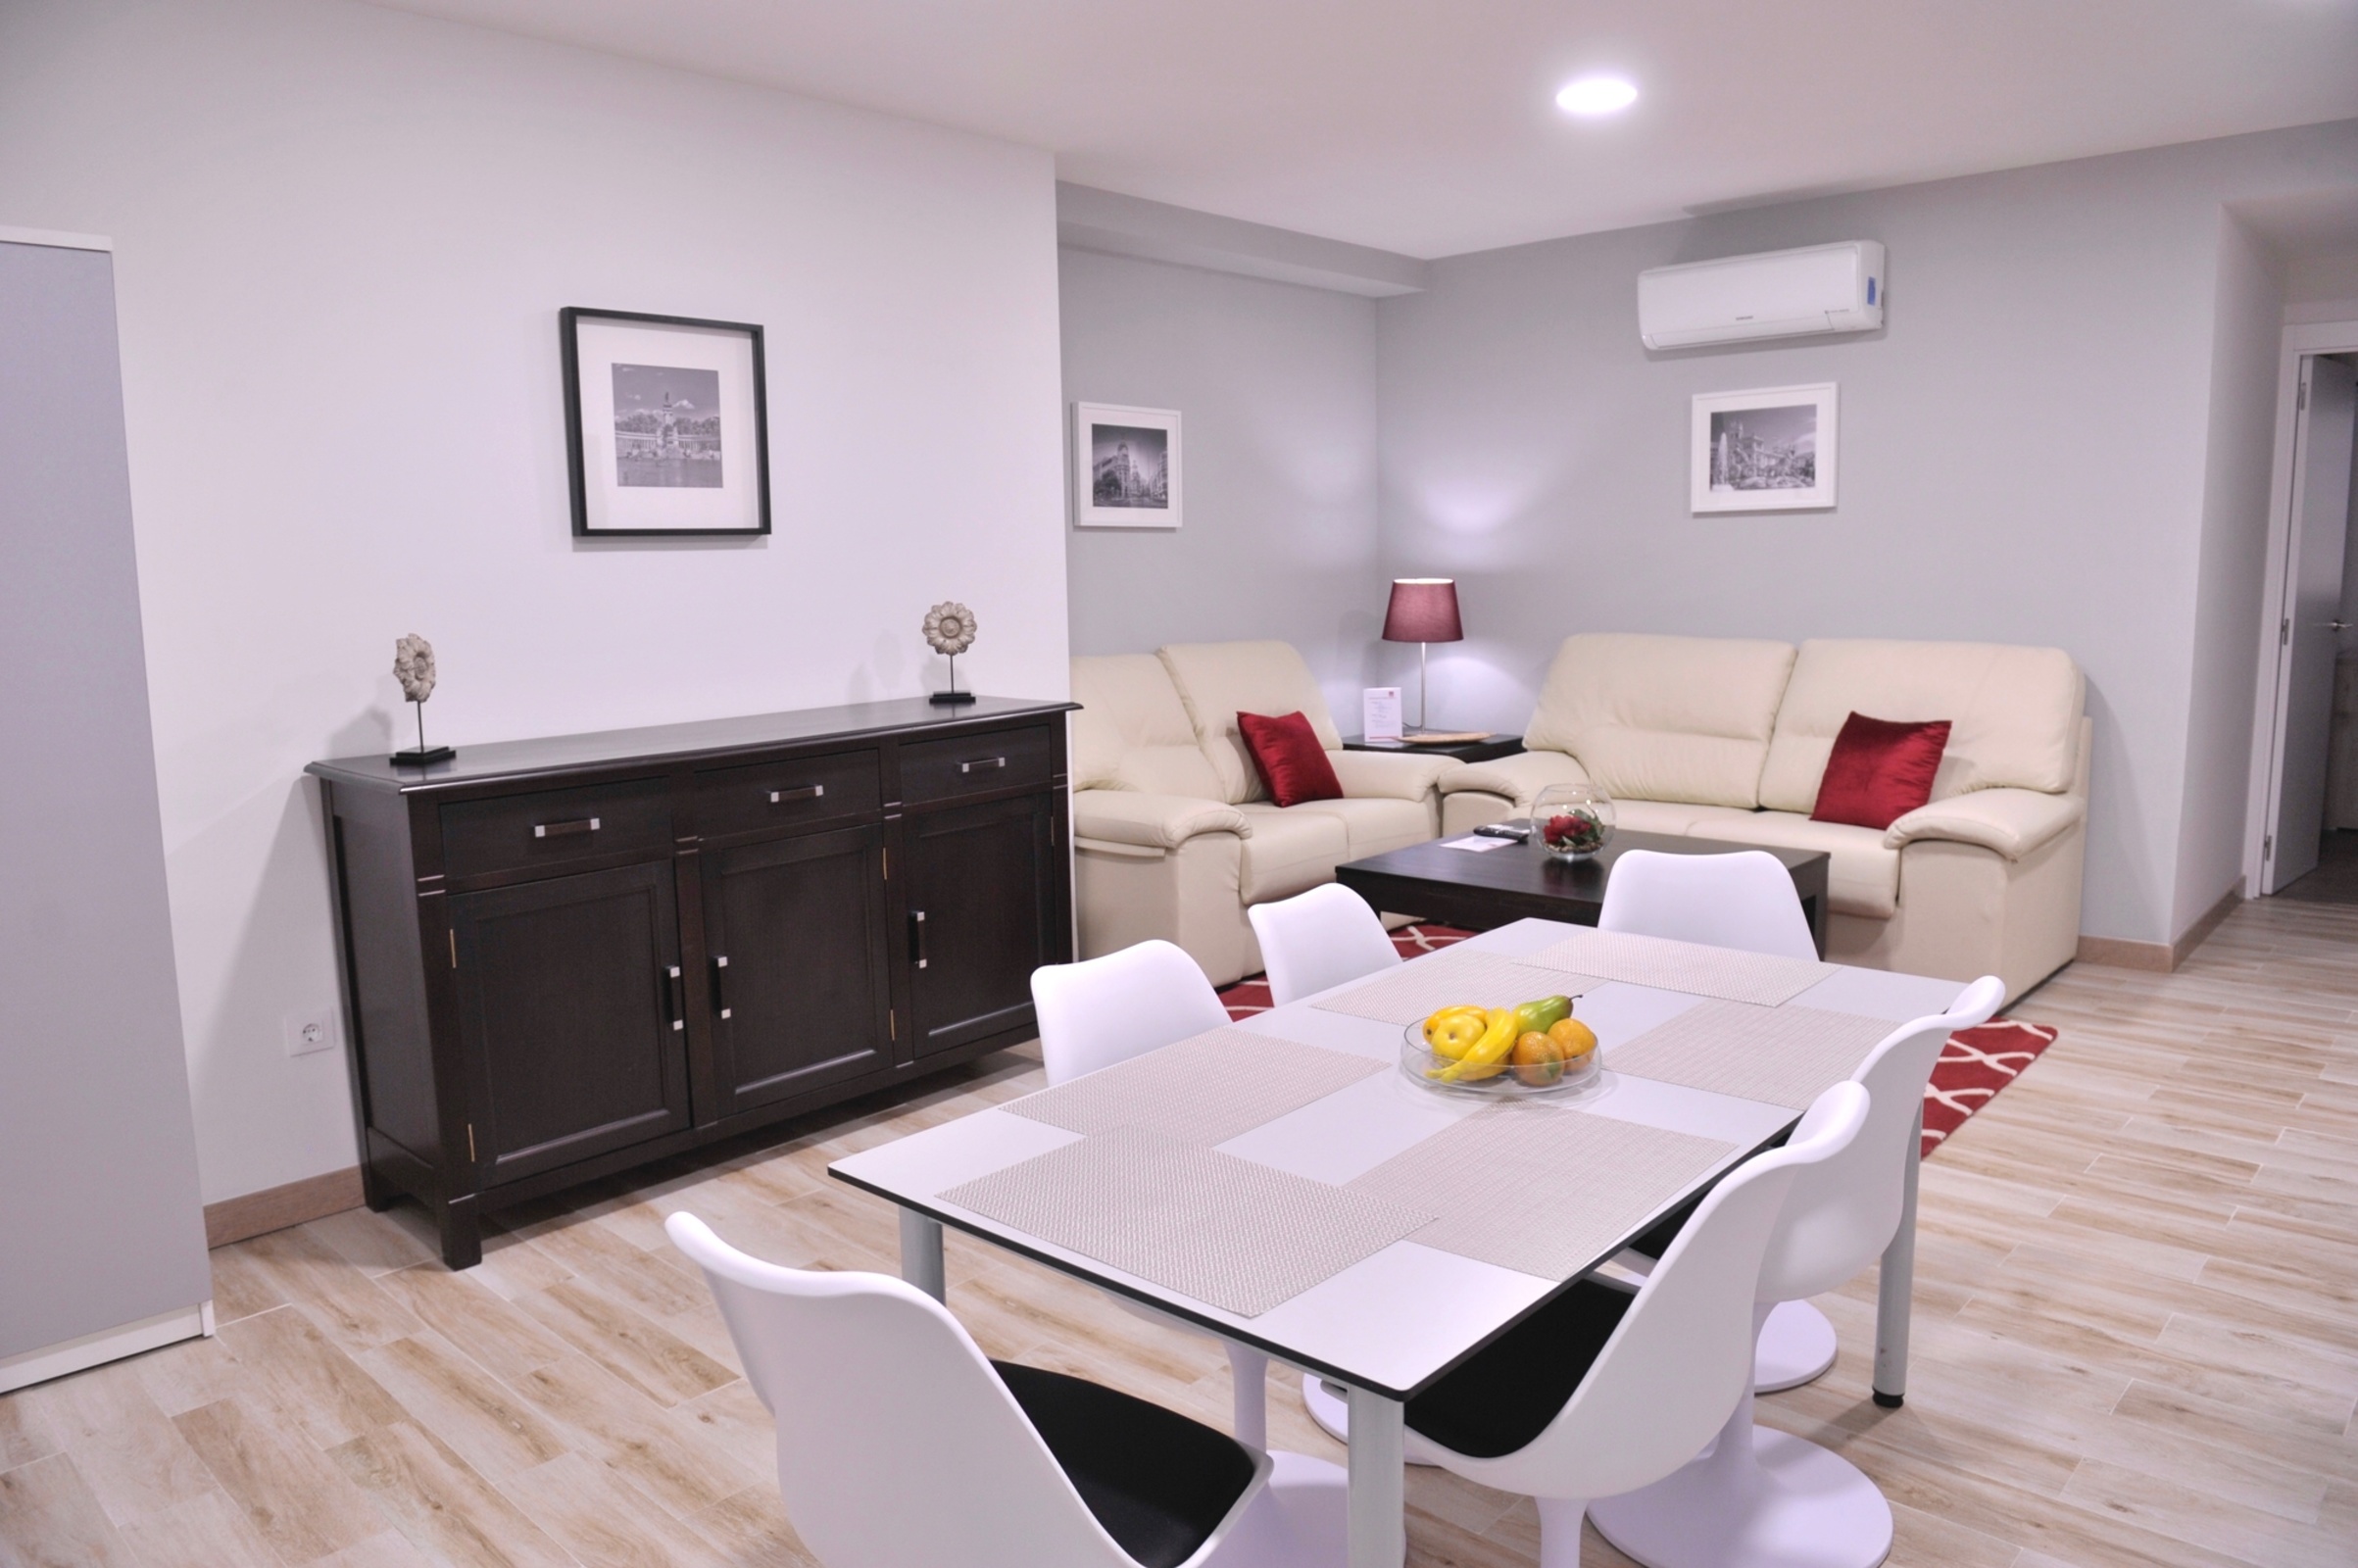 Why People Book Serviced Apartments